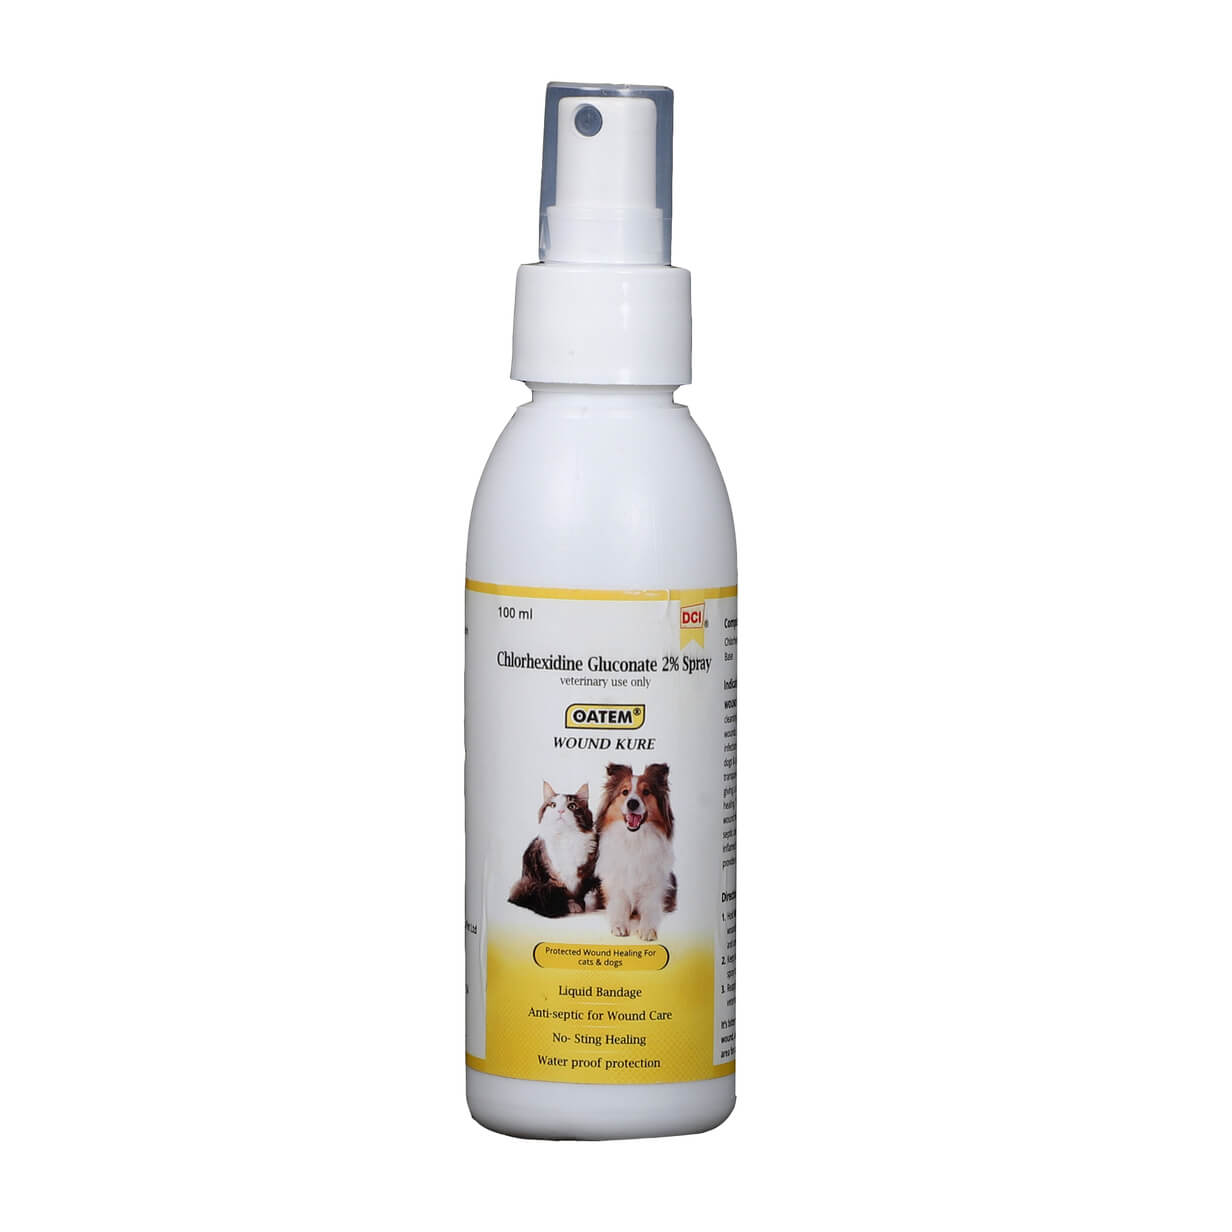 WOUND KURE - Anti-bacterial & Anti-Septic Spray For Animals